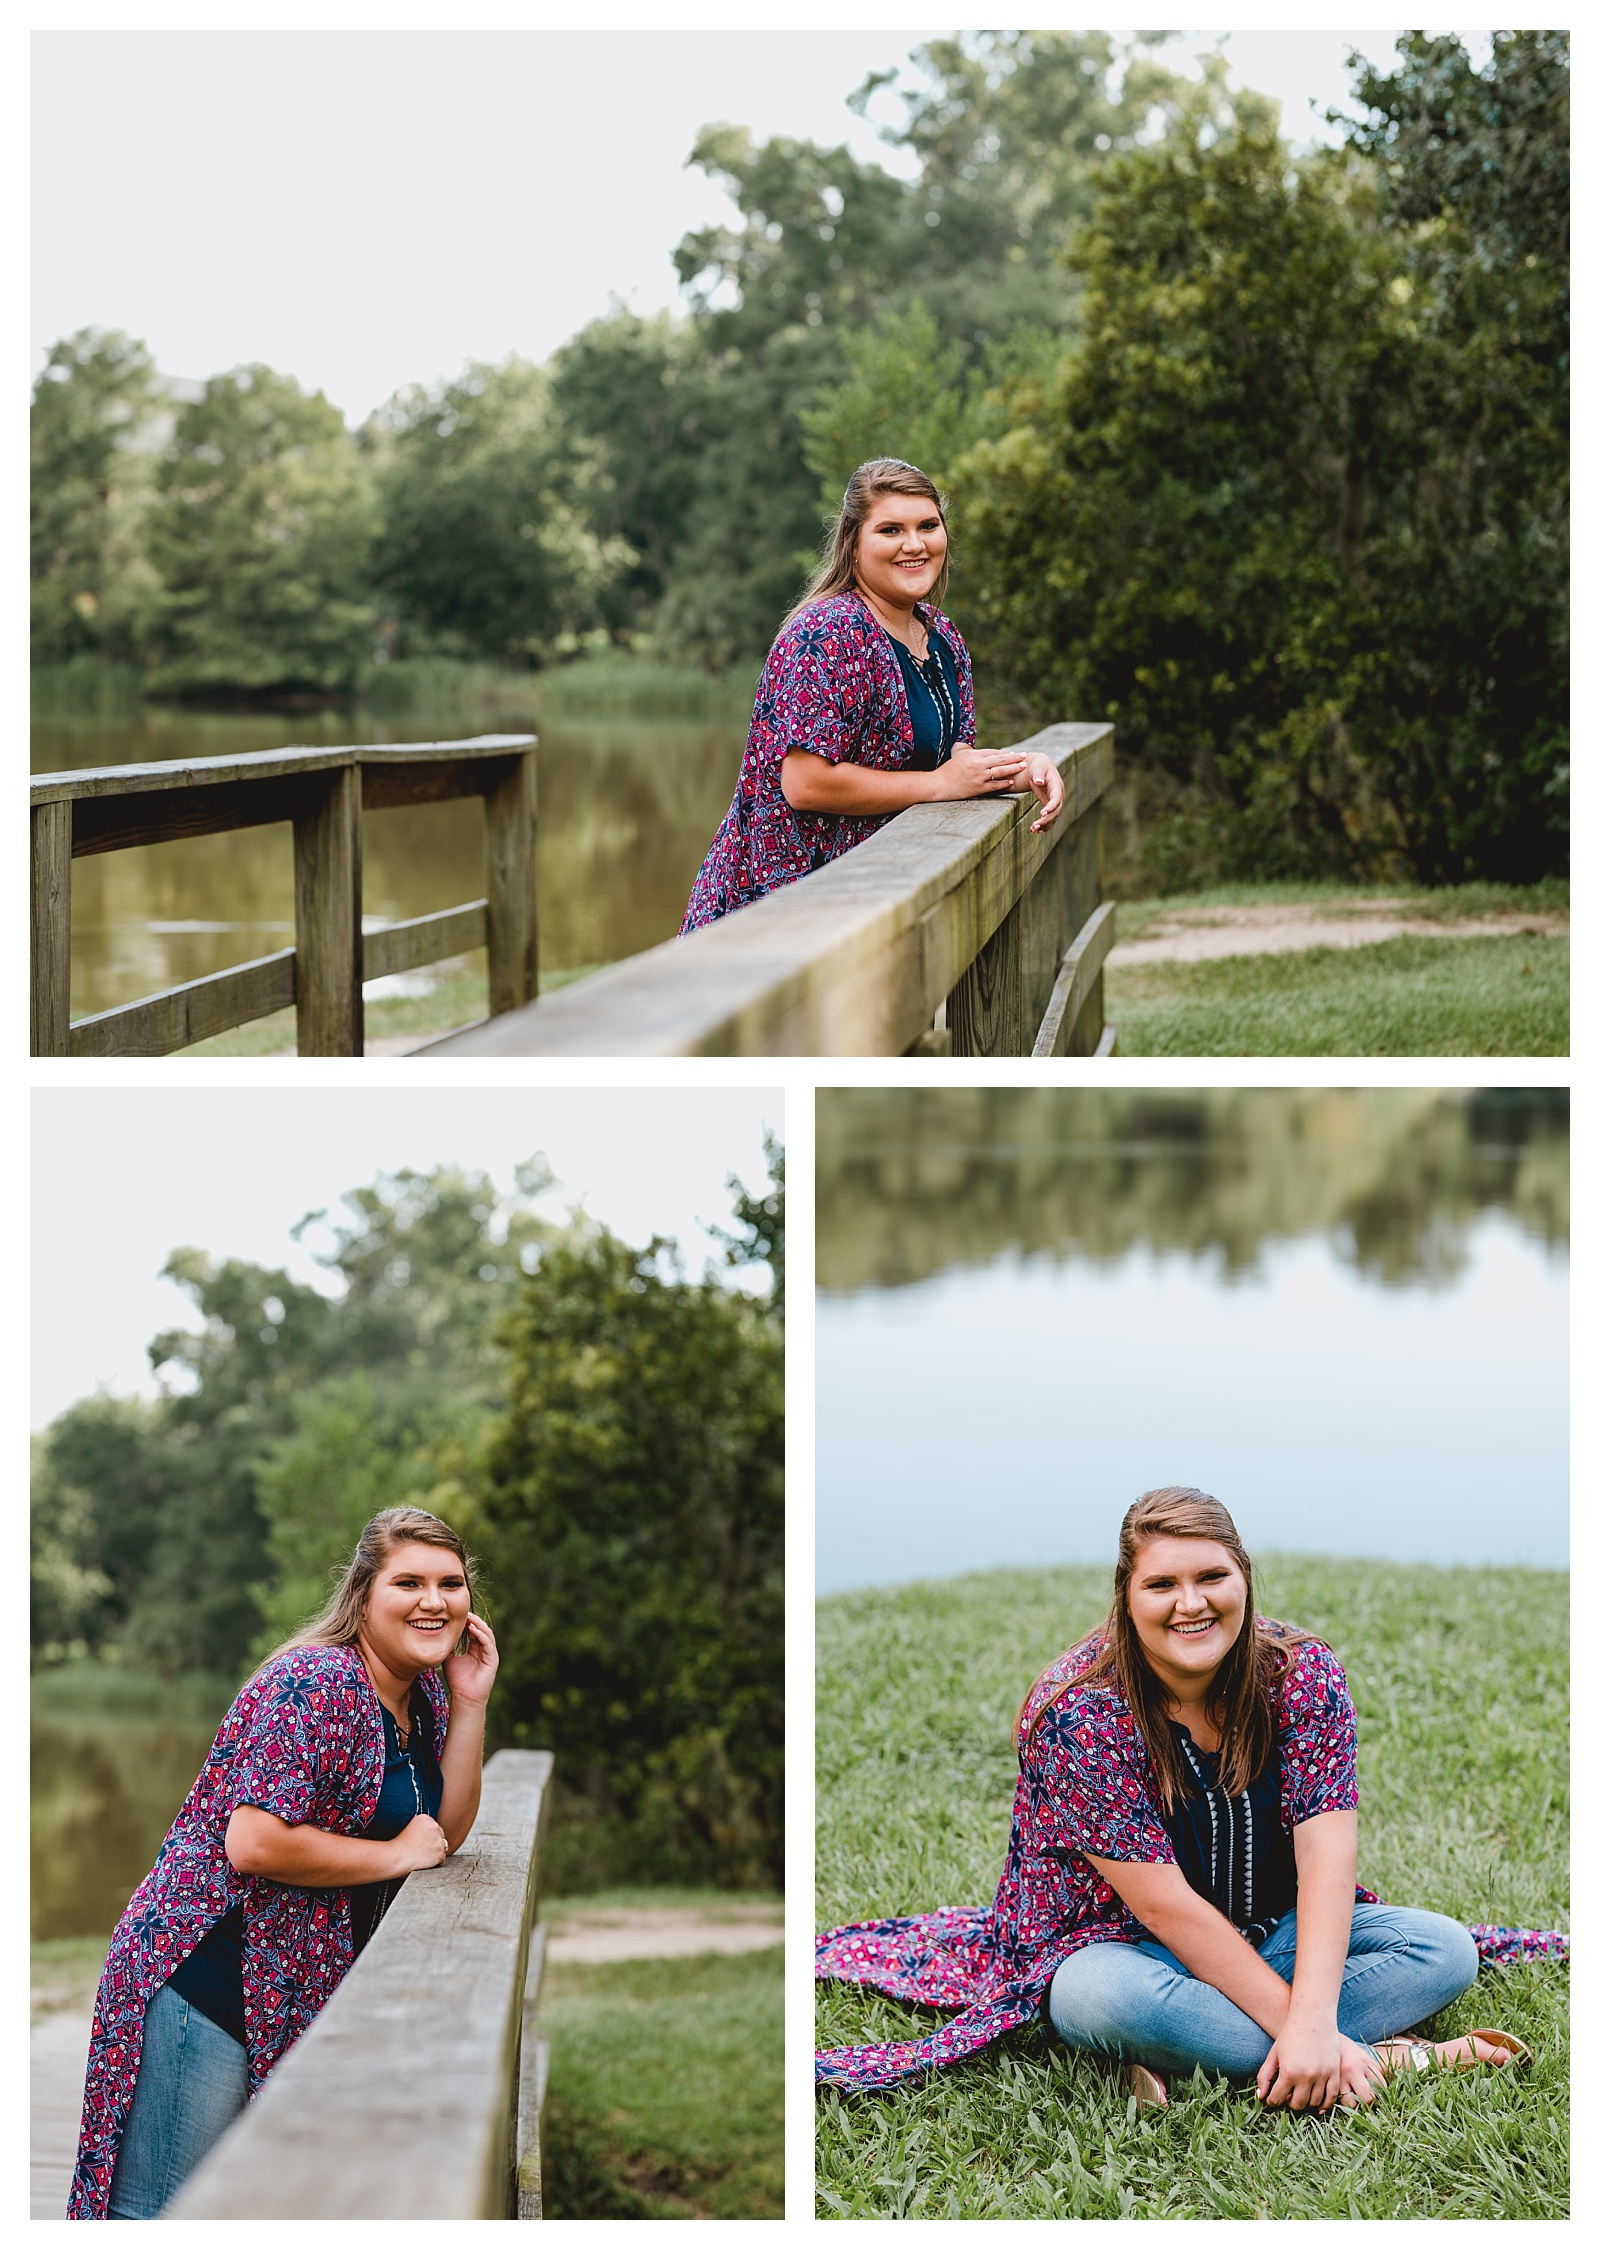 Lake Alice senior portraits in Gainesville, FLorida. Shelly Williams Photography